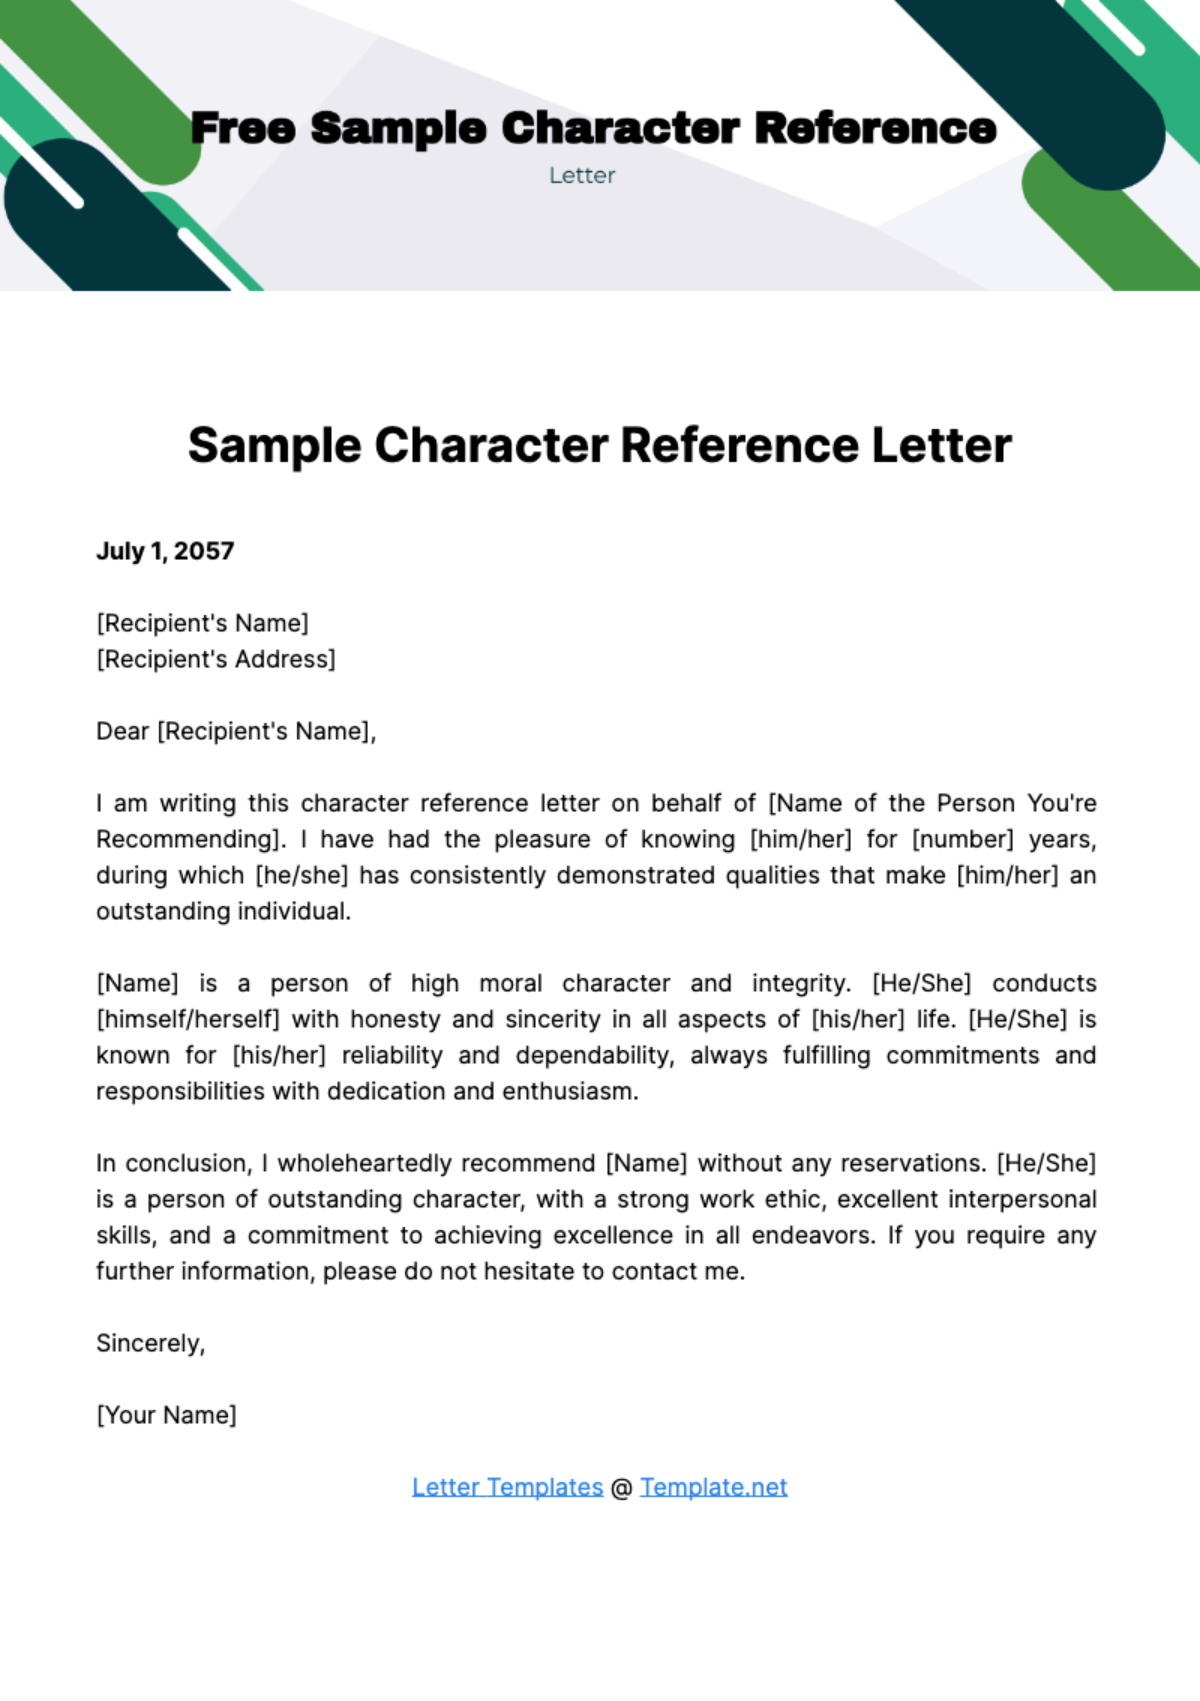 Sample Character Reference Letter Template